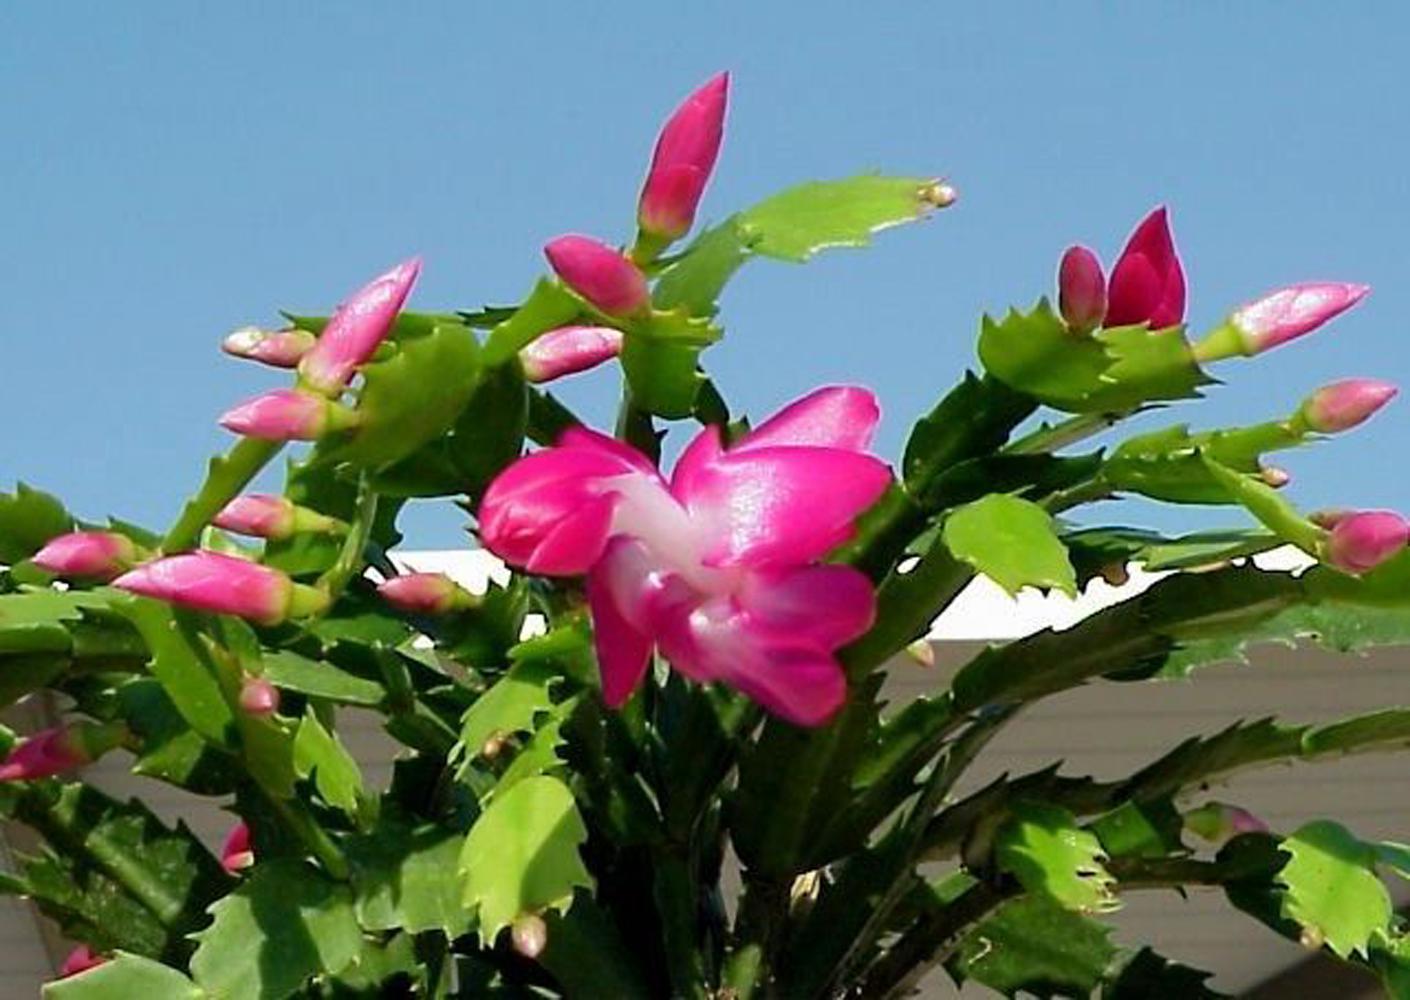 This Christmas cactus is beautiful outside on a warm winter day, but most of the time these dependable holiday plants brighten up special areas inside the home.